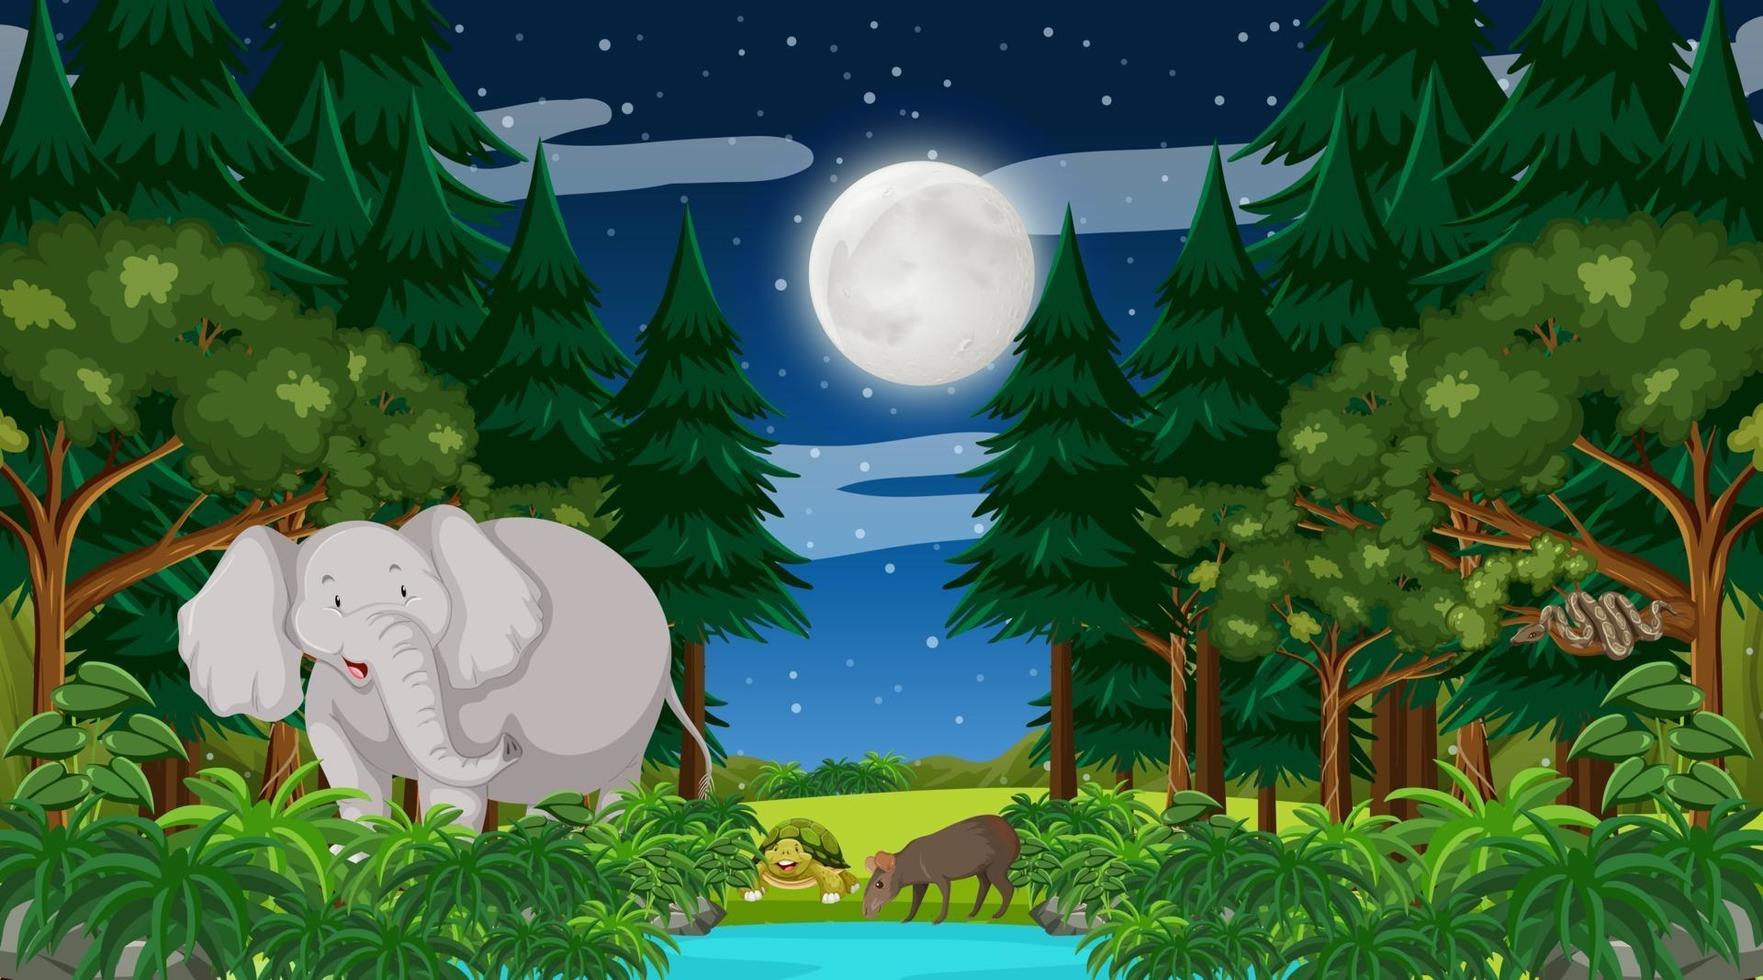 Forest at night time scene with a big elephant and other animals vector